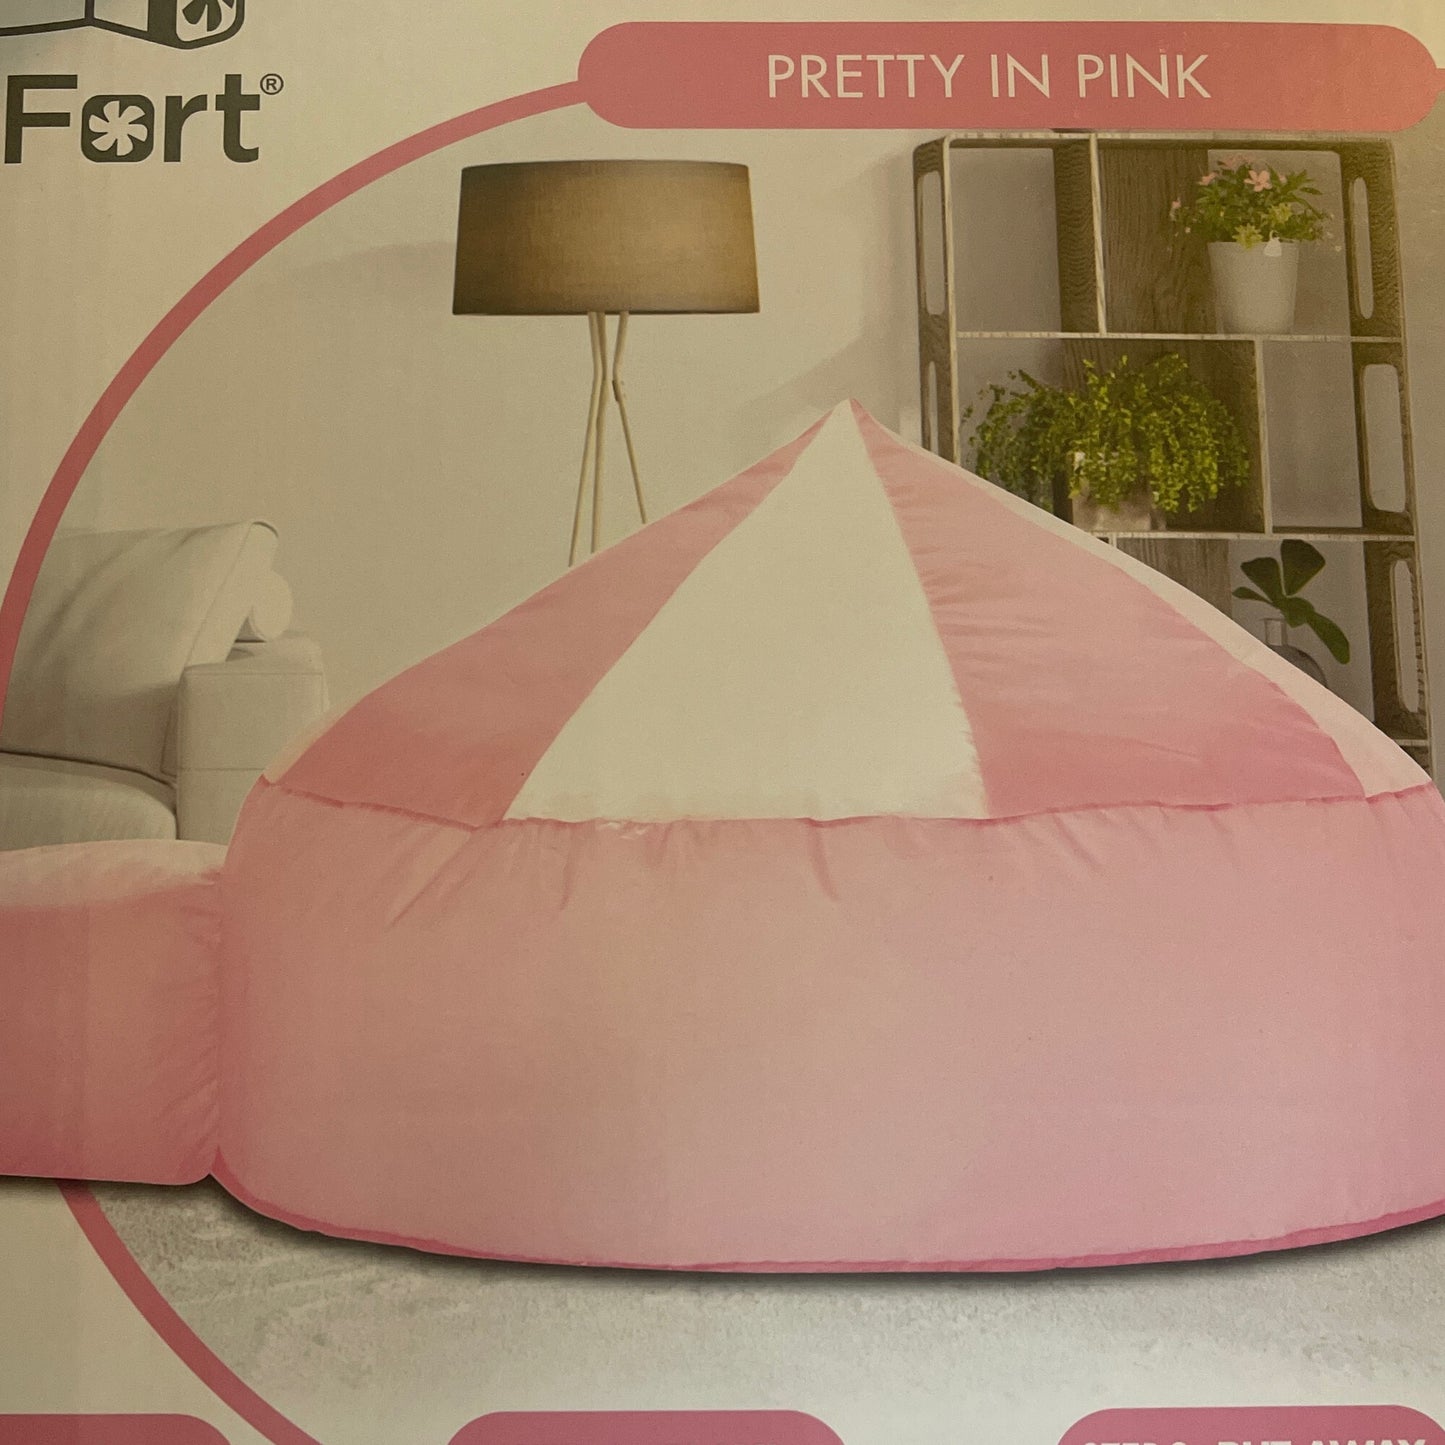 The Original AirFort: Pretty in Pink